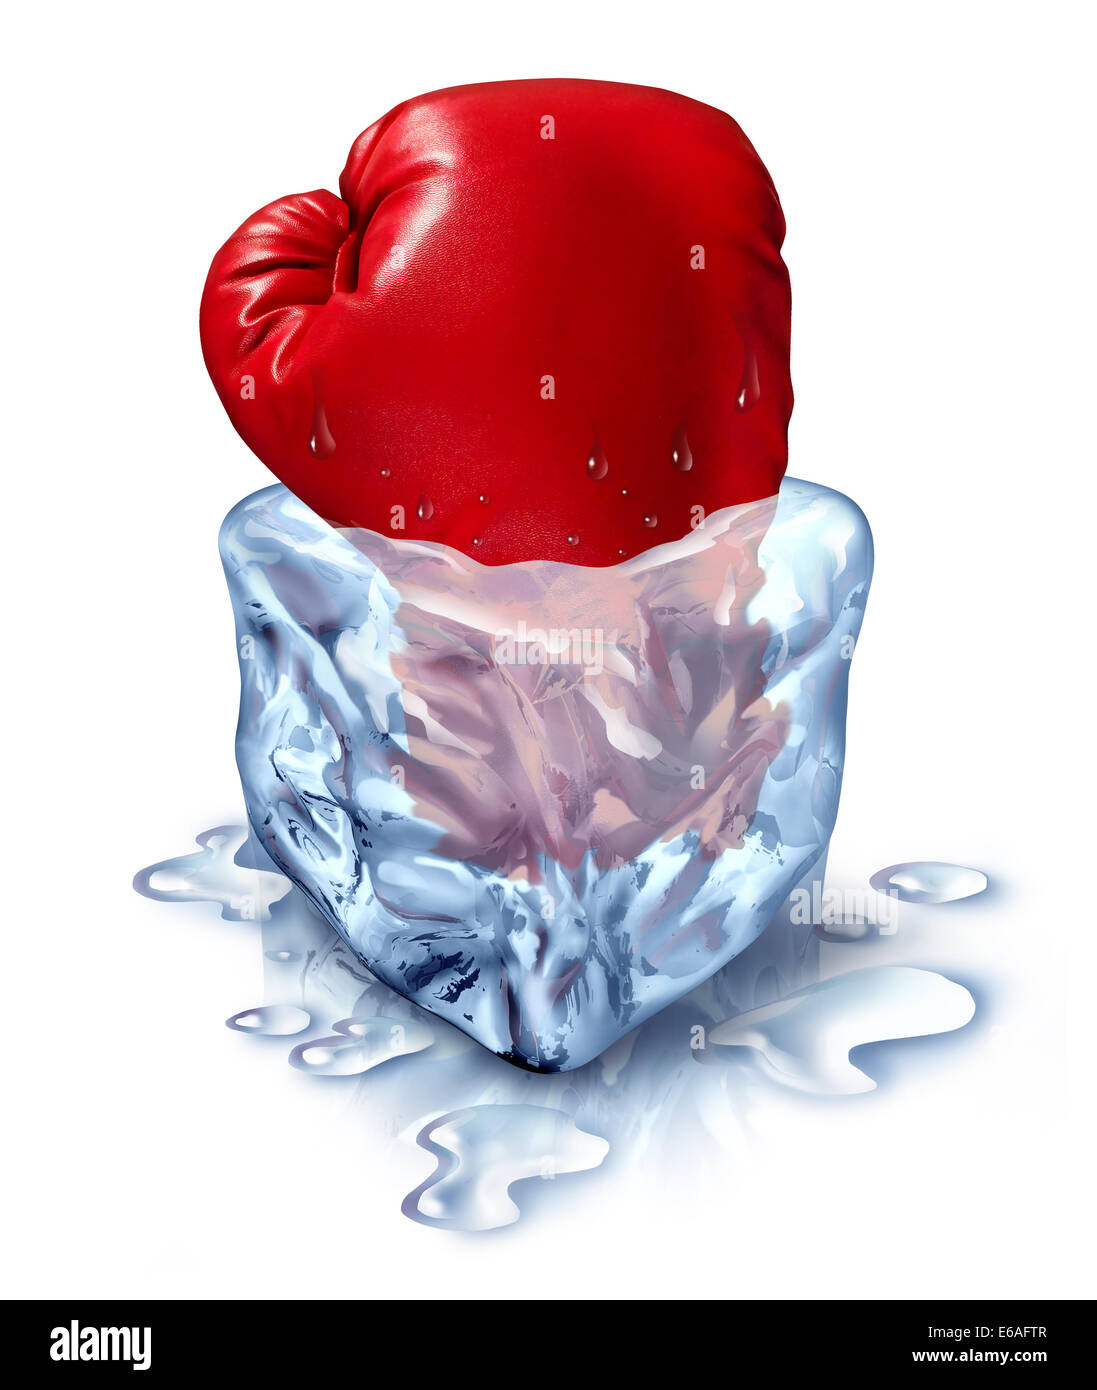 Freezing out the competition business concept as a red boxing glove in an ice cube as a metaphor for chilling out with a fresh competitor icon or frozen financial assets. Stock Photo